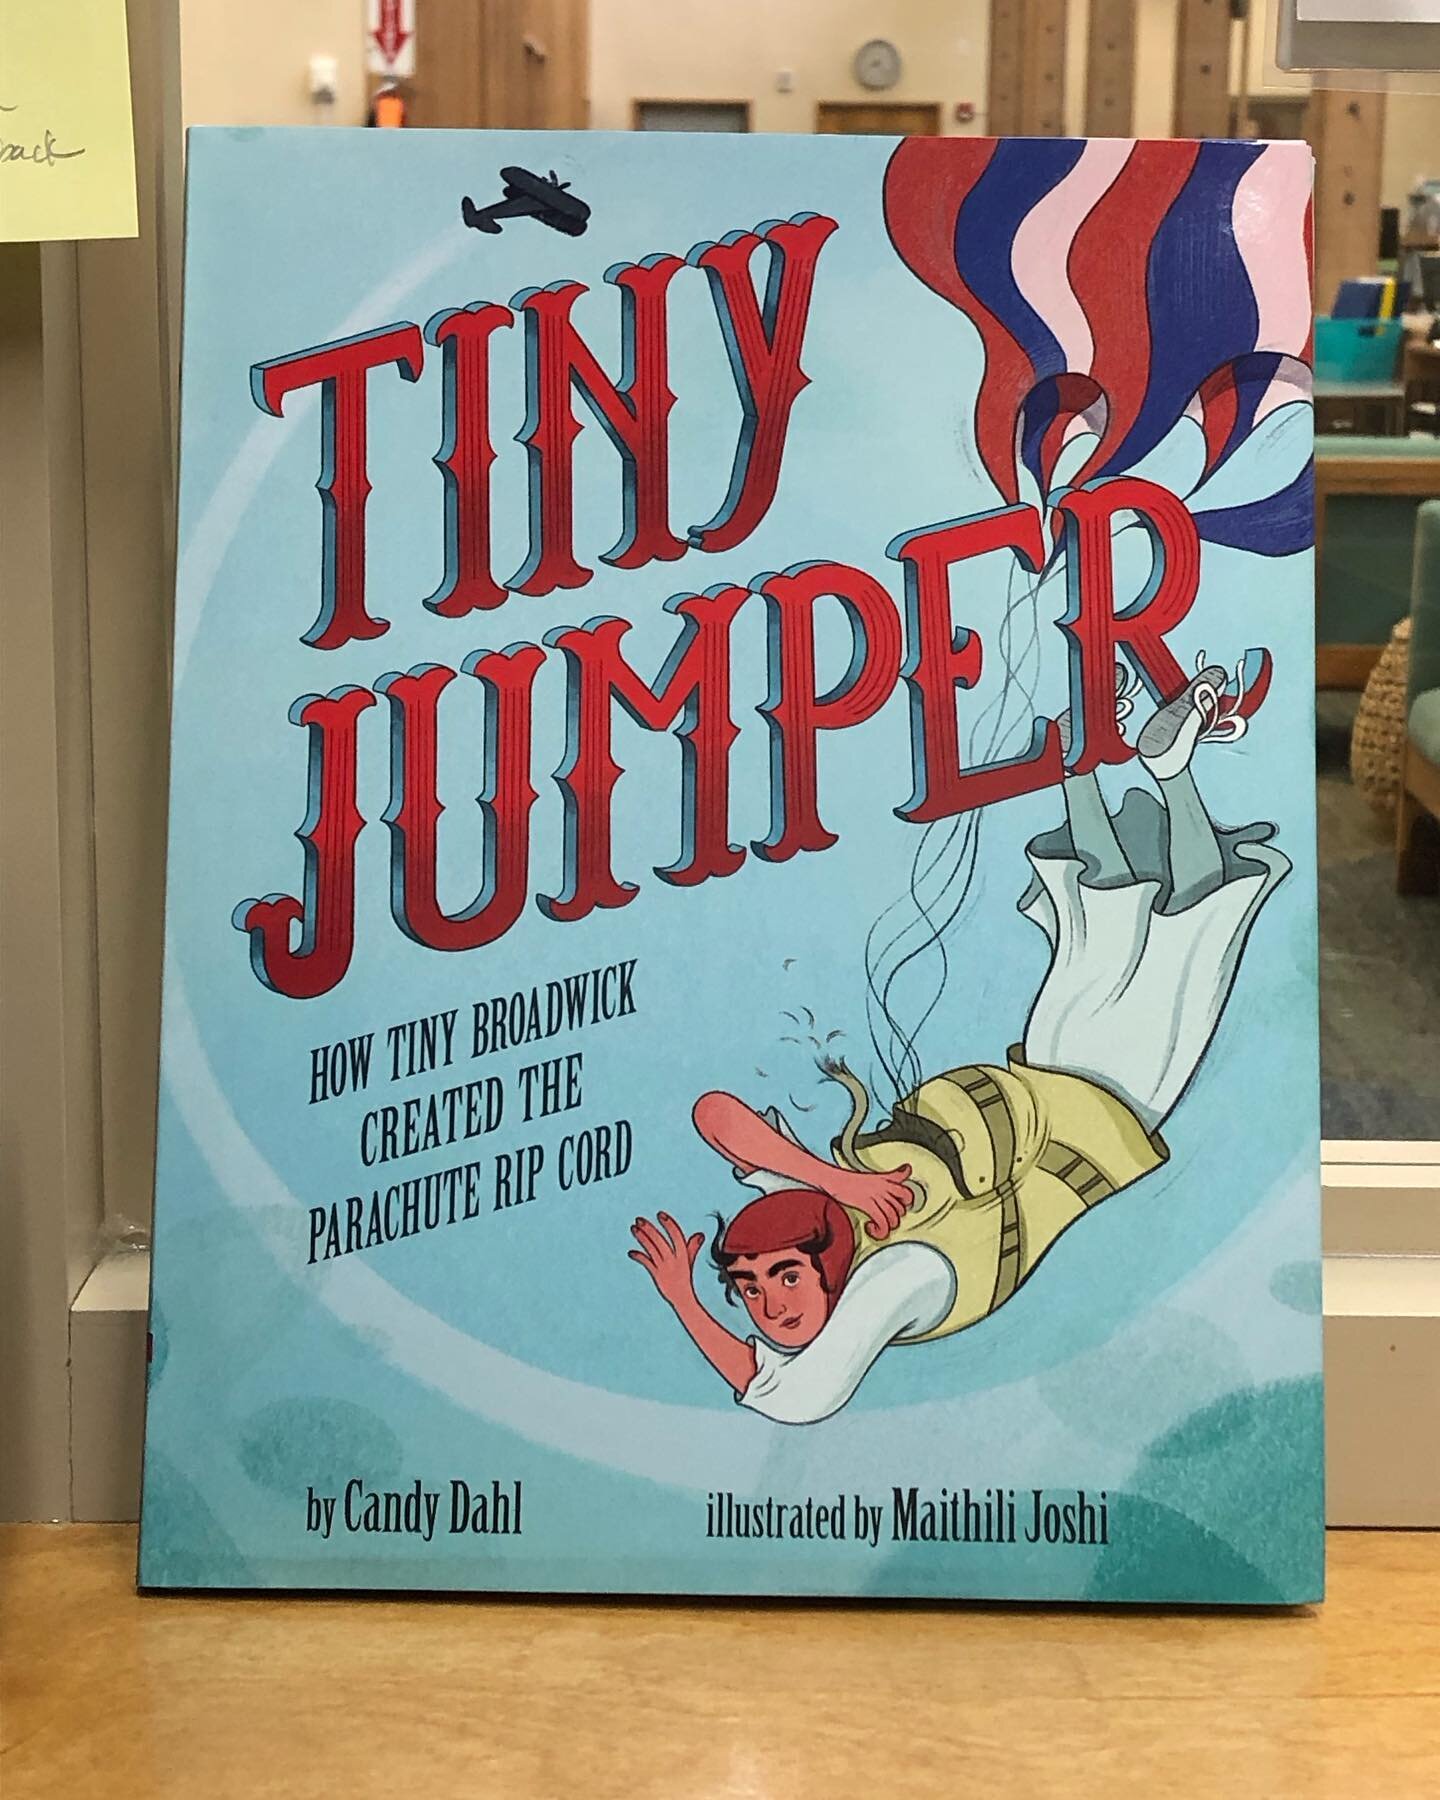 Watch out! Tiny Jumper has landed in the library. Can&rsquo;t wait to share this inspiring, fun, beautiful book with students.